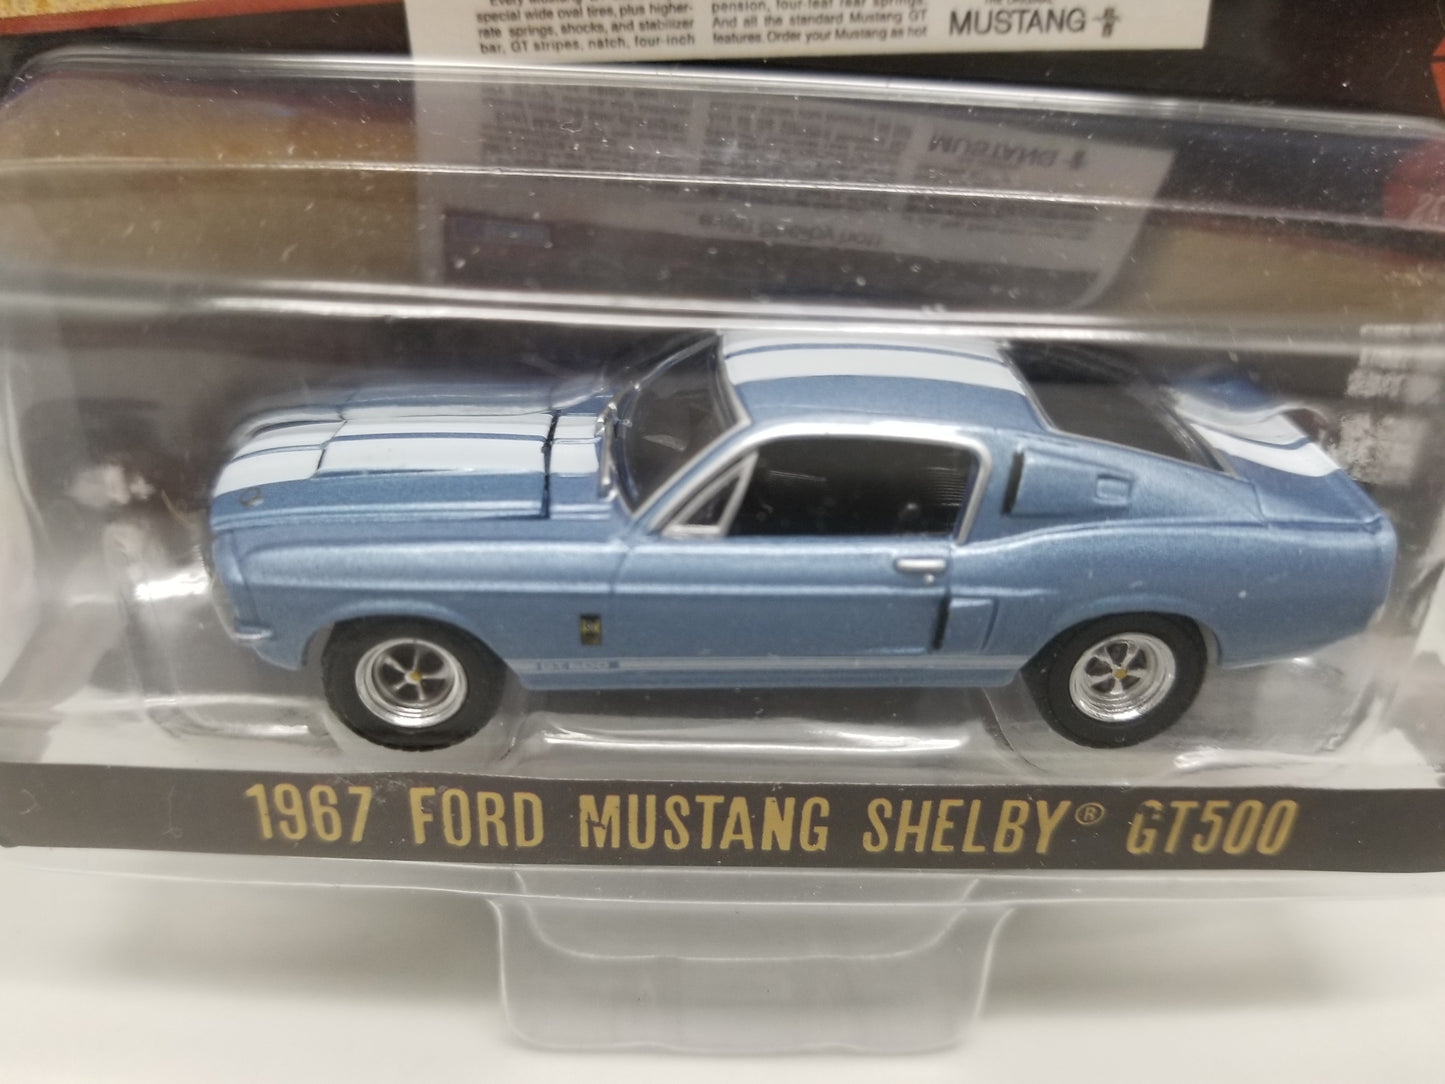 GL - 1967 Ford Mustang Shelby GT500